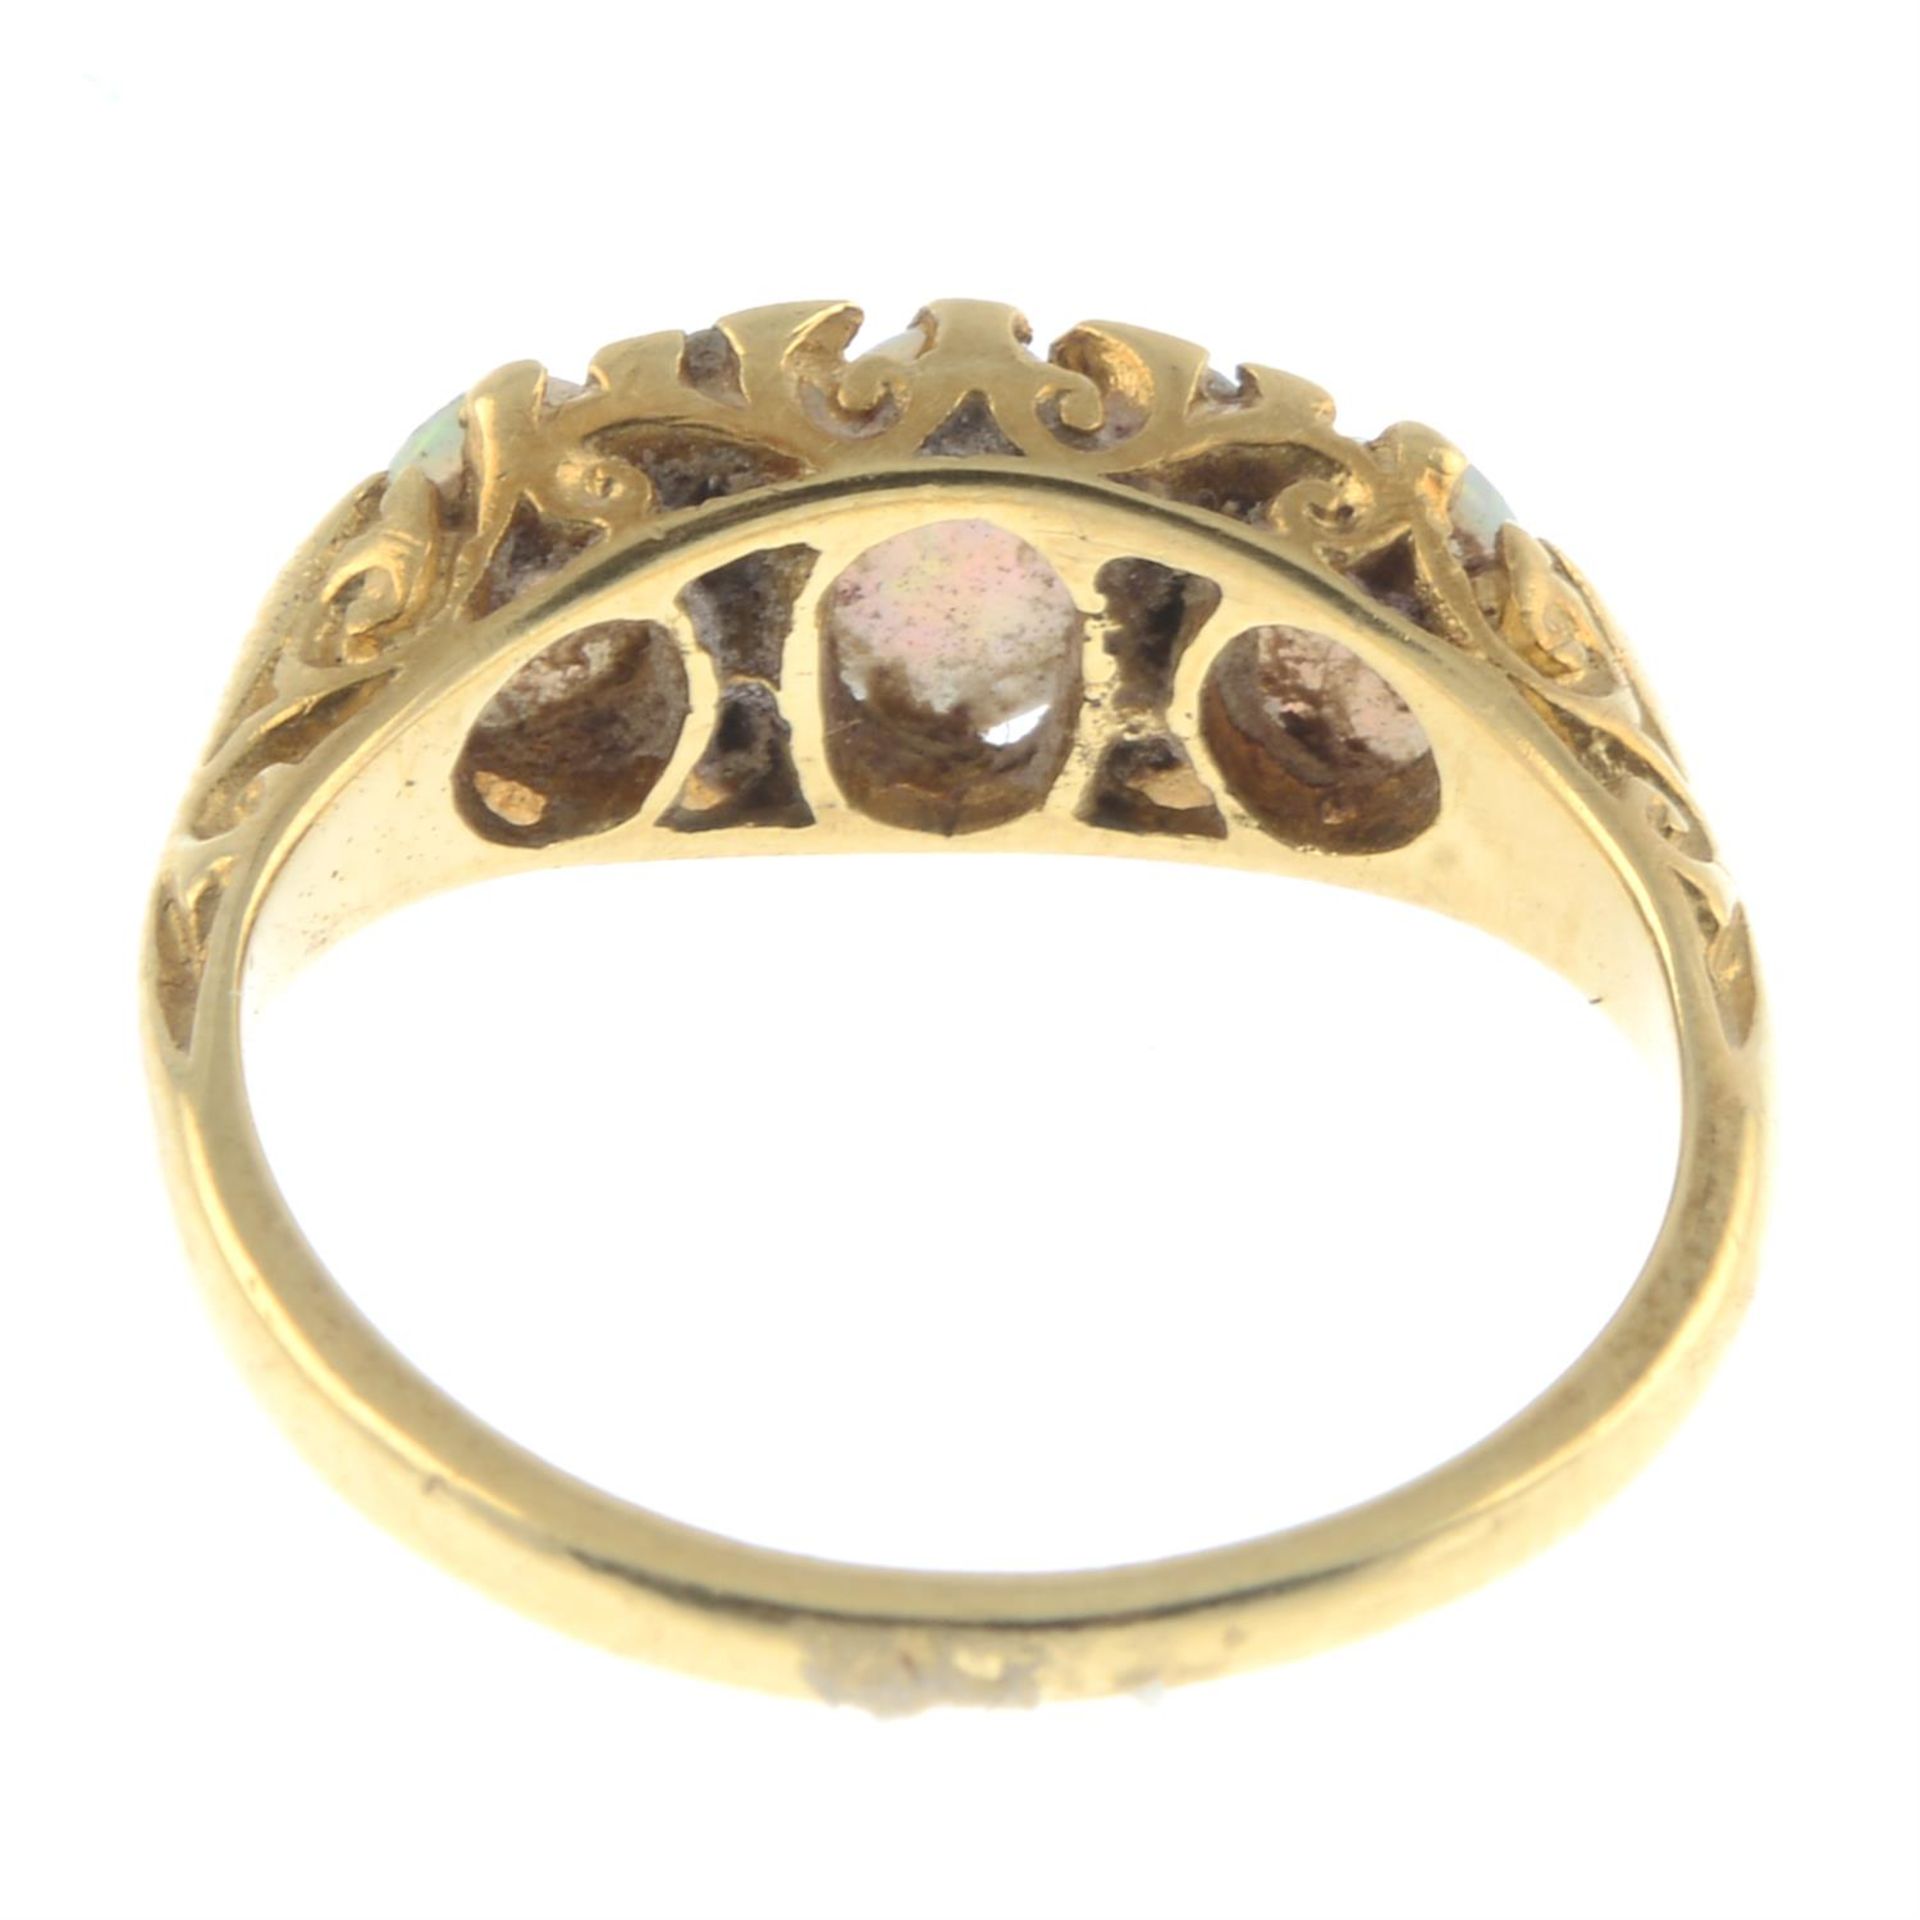 18ct gold opal & diamond ring - Image 2 of 2